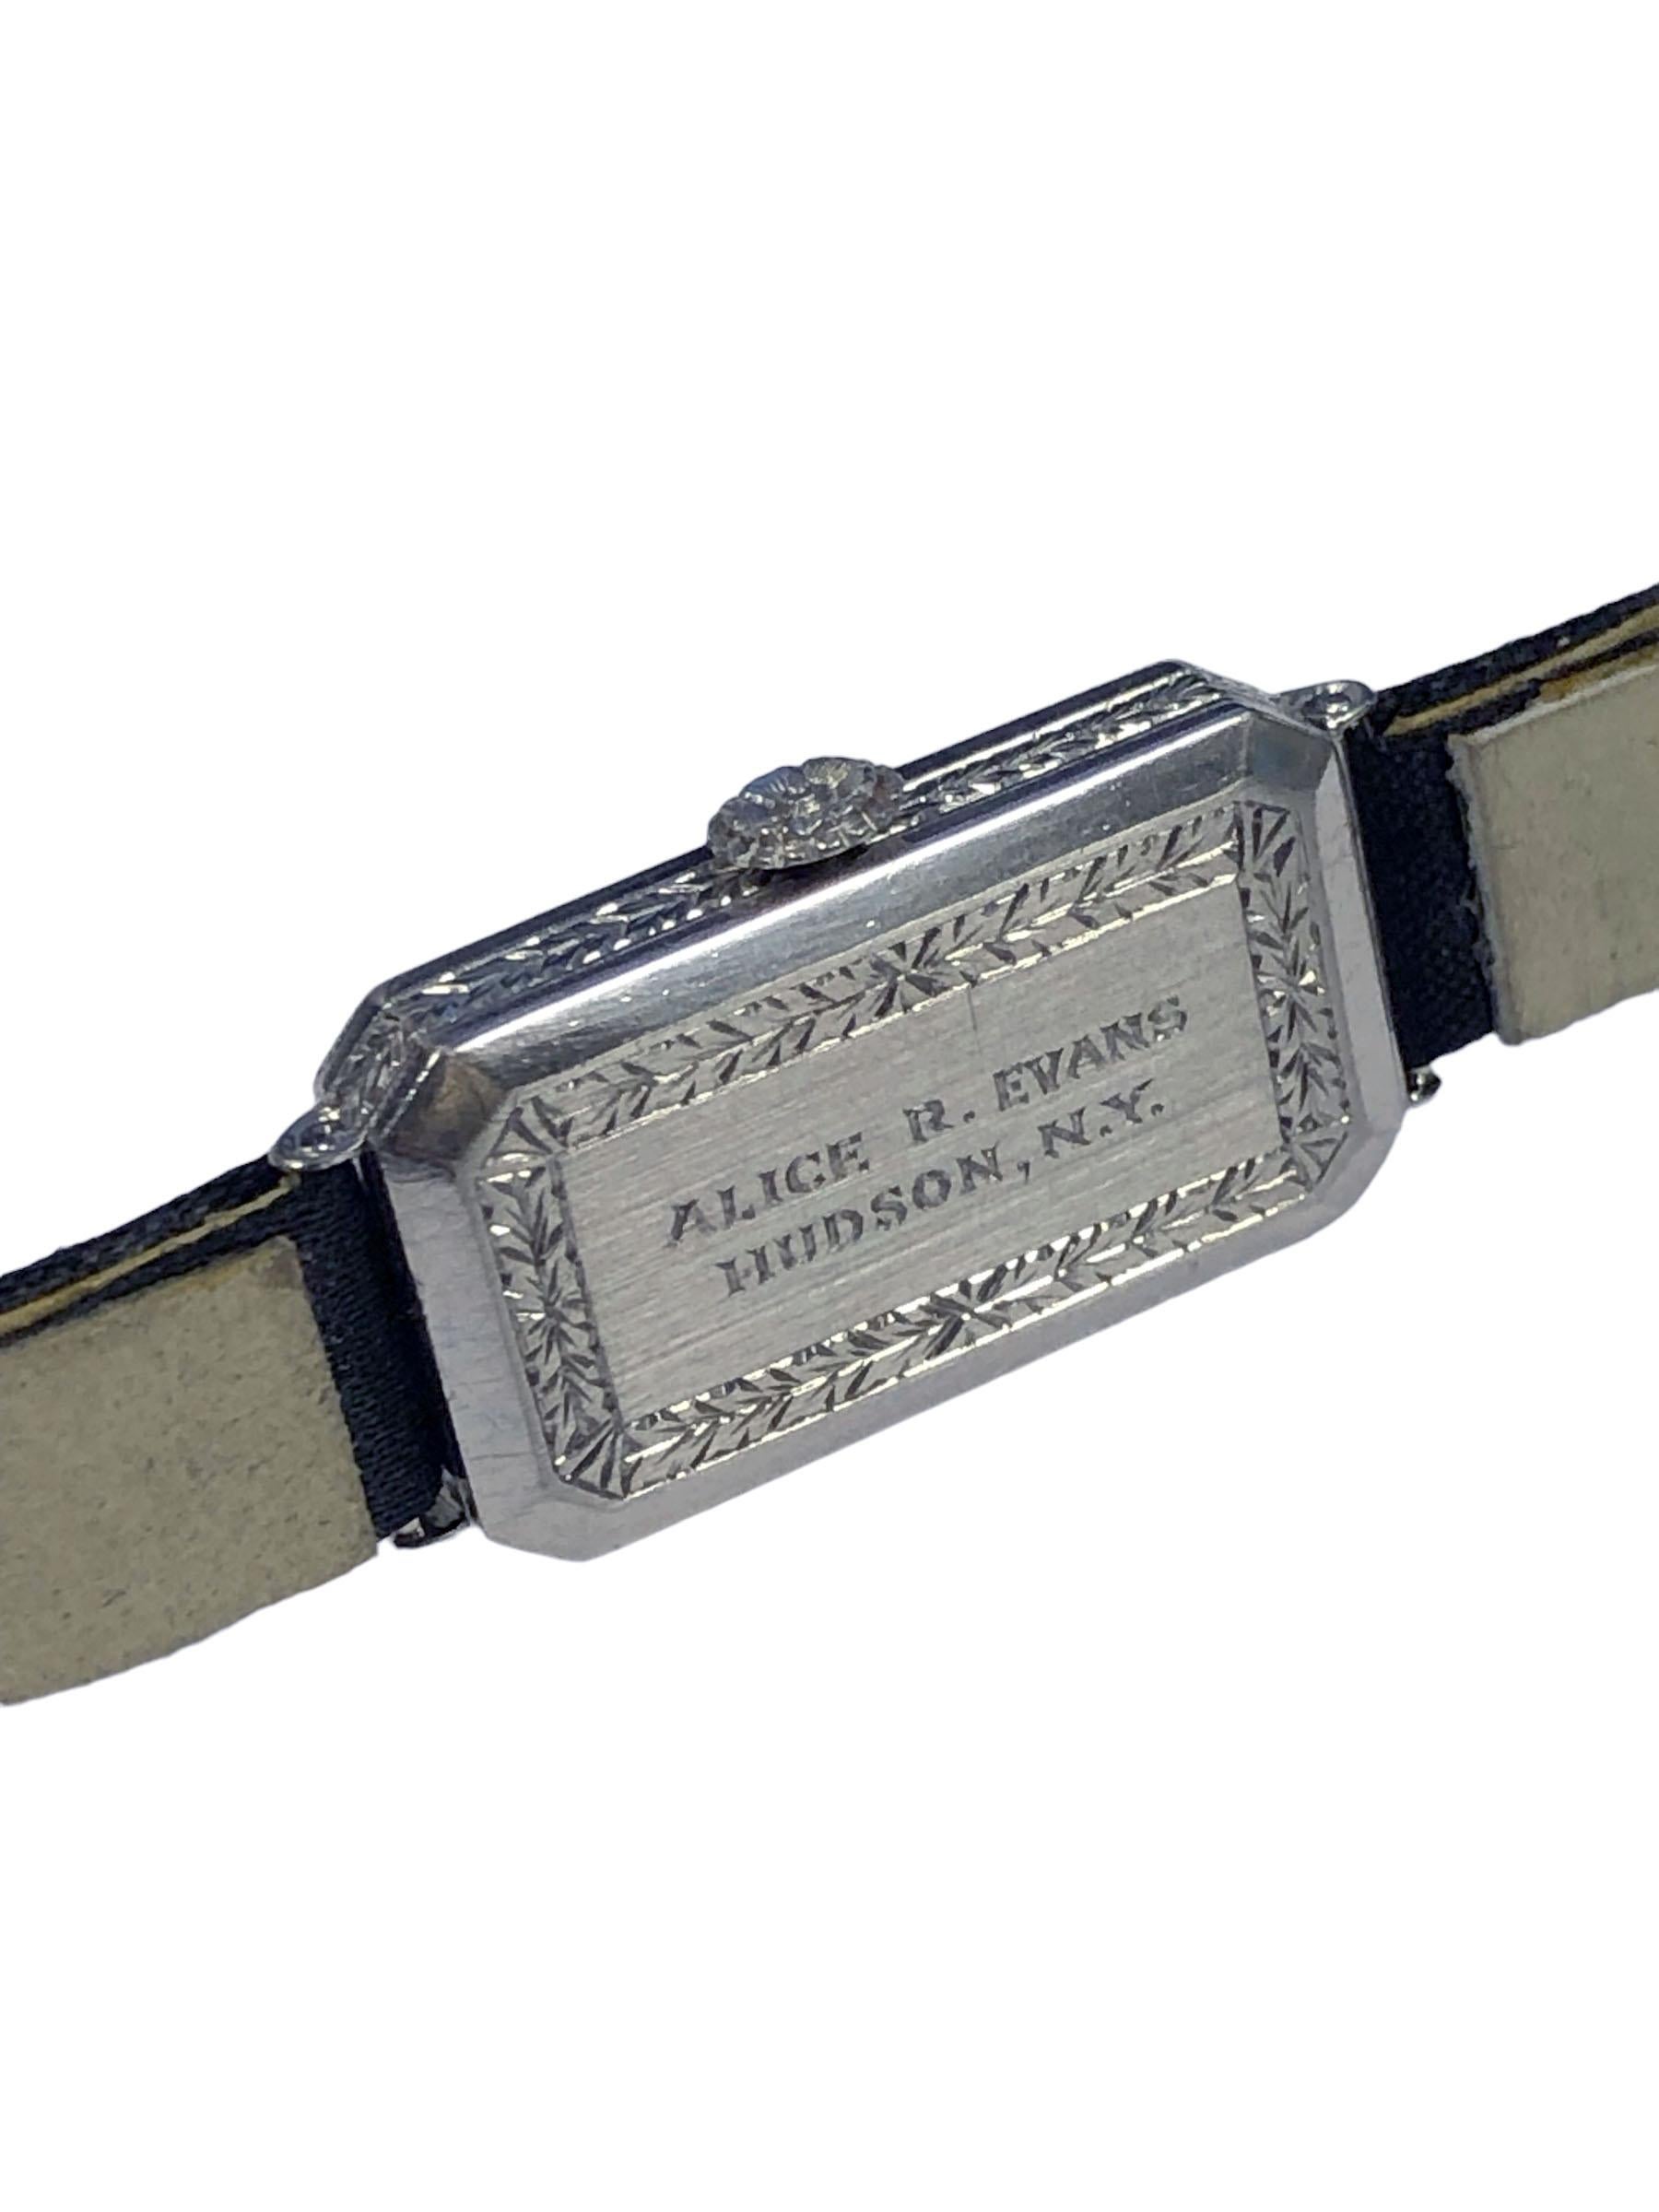 Circa 1920s Patek Philippe for Tiffany & Company Ladies Wrist Watch, 26 X 9 M.M. 2 Piece Platinum Case set with European cut Diamonds totaling 1 Carat, the case sides and back are further decorated with Hand Engraving design work, original platinum